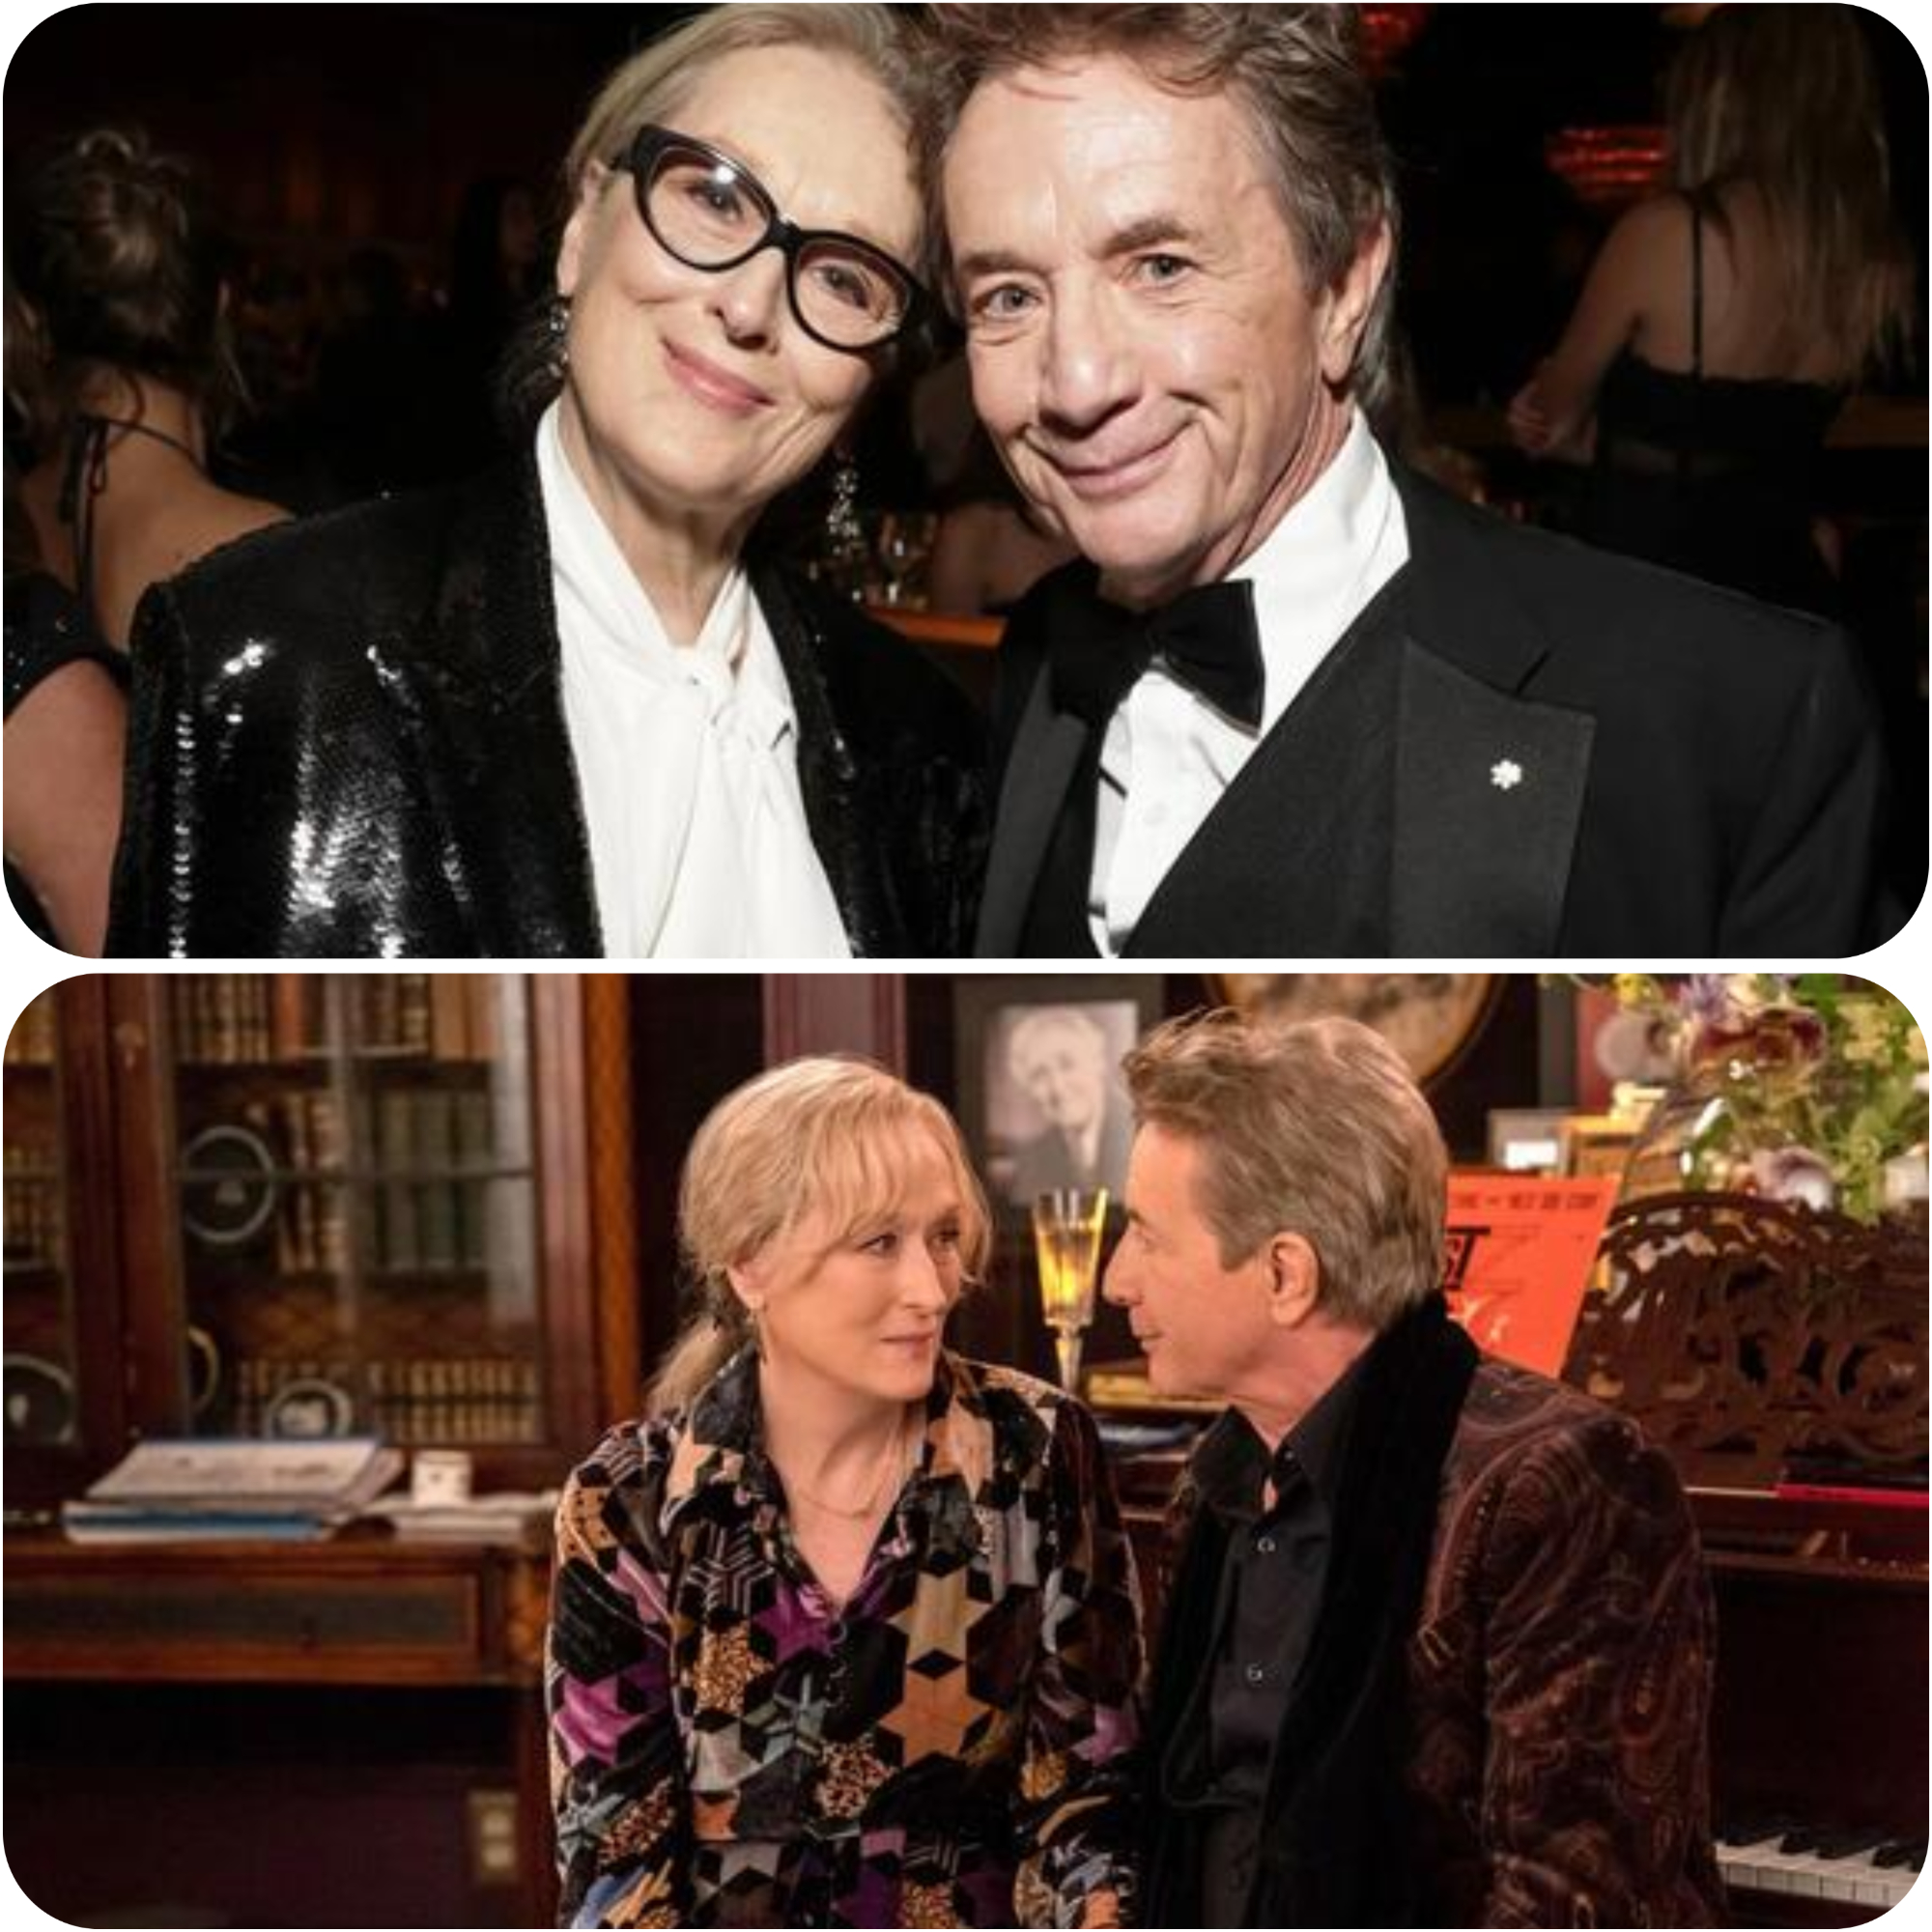 Meryl Streep and Martin Short: Hollywood Power Couple or Just Close Friends?